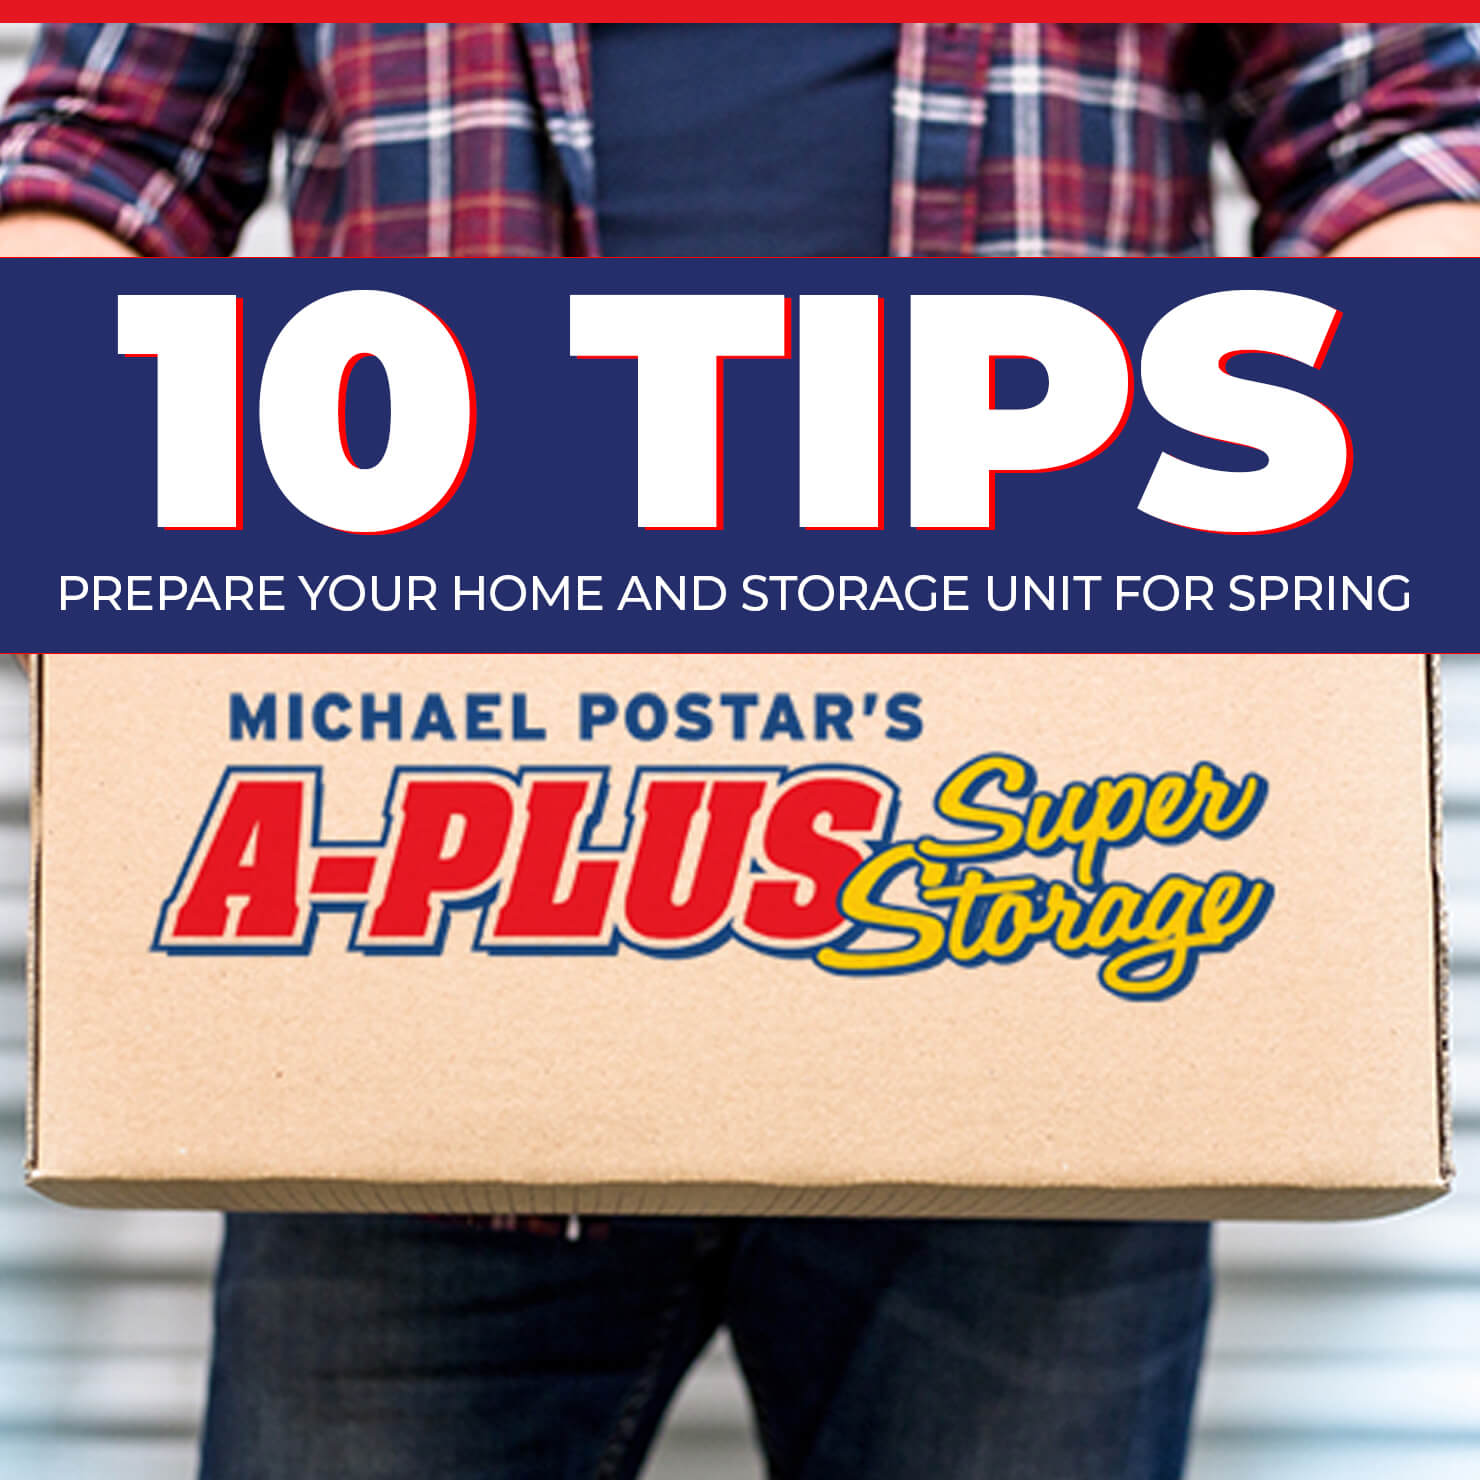 10 Tips to Prepare Your Home and Storage Unit for Spring